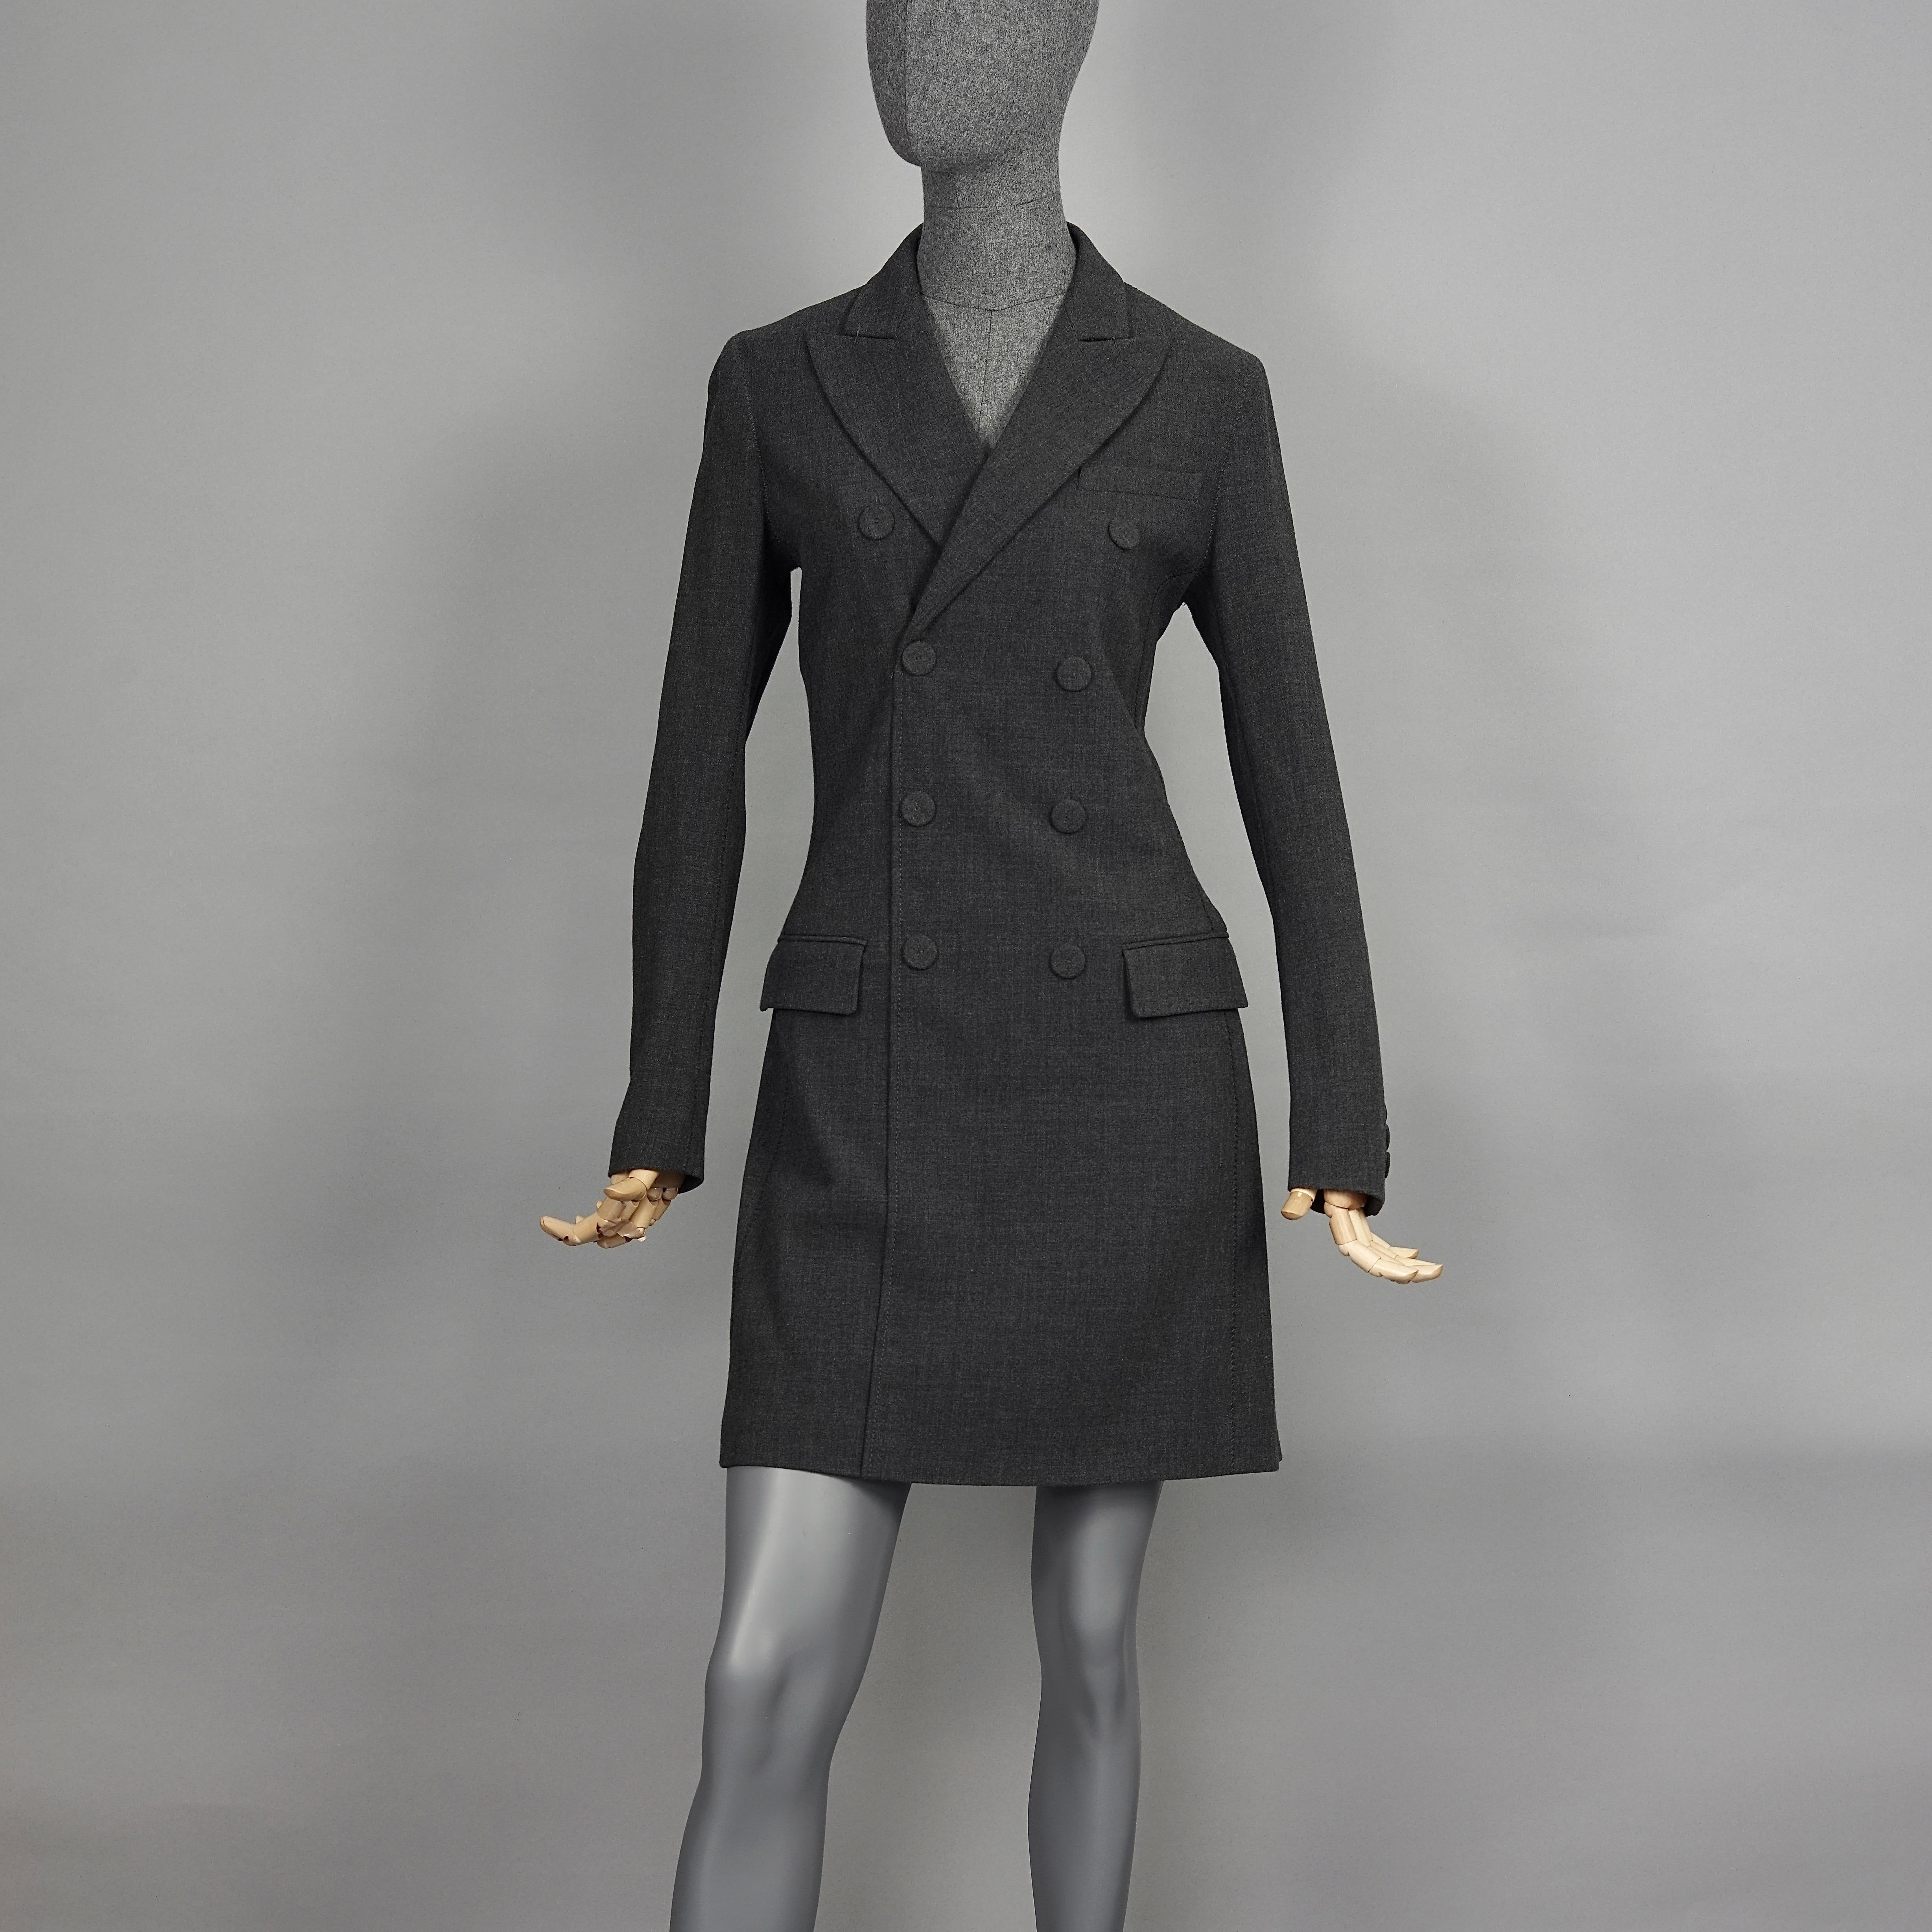 Vintage JEAN PAUL GAULTIER Smoking Double Breasted Wool Dress Suit

Measurements taken laid flat, please double bust, waist and hips:
Shoulder: 15.35 inches (39 cm)
Sleeves: 24.40 inches (62 cm)
Bust: 18.50 inches (47 cm)
Waist: 15.35 inches (39